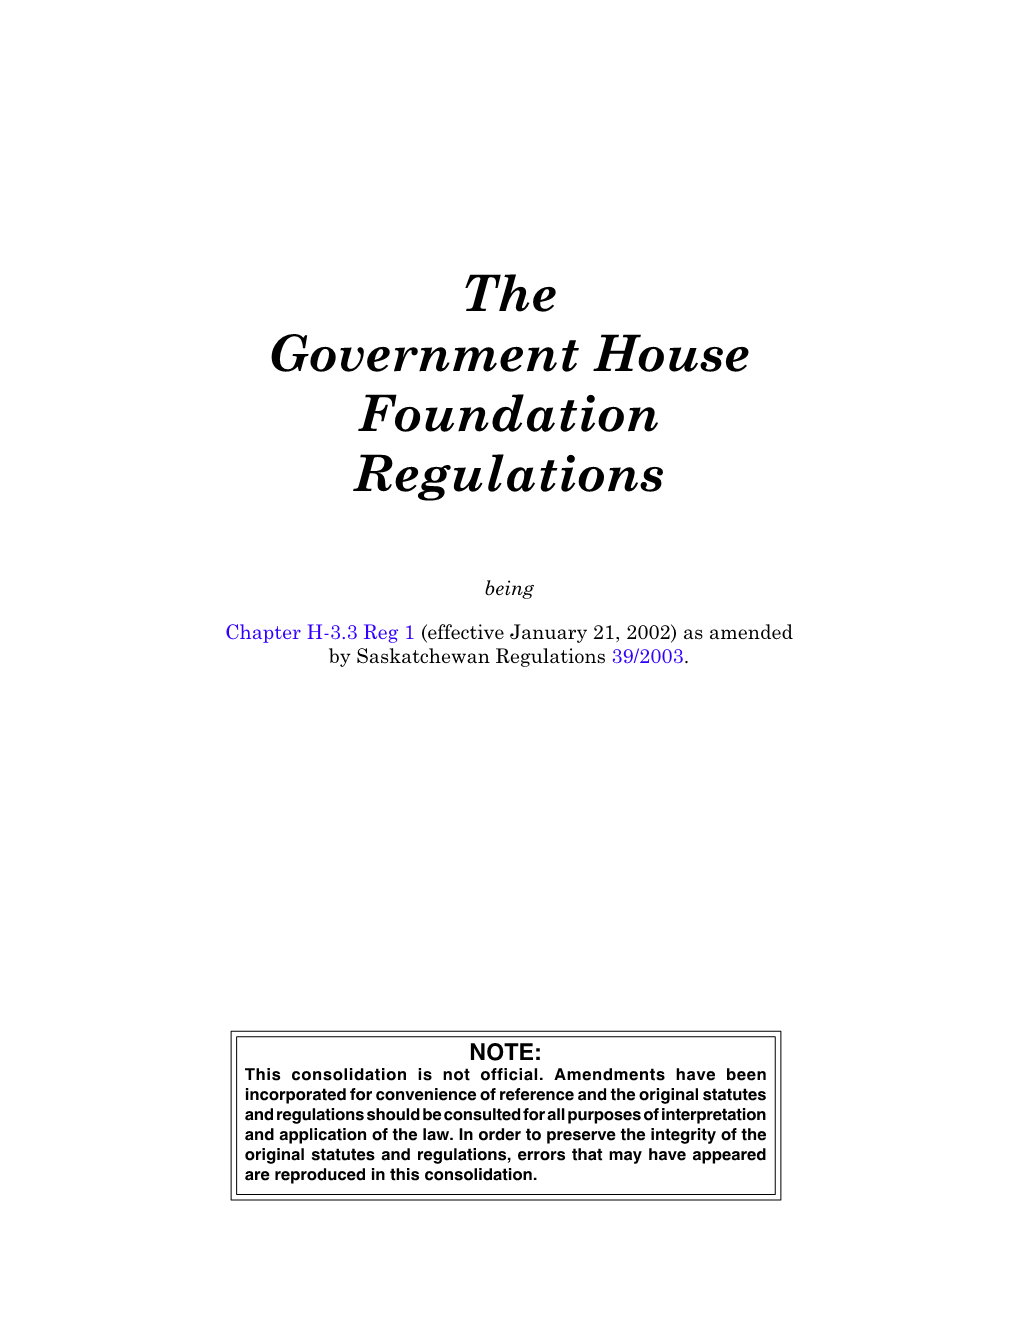 The Government House Foundation Regulations